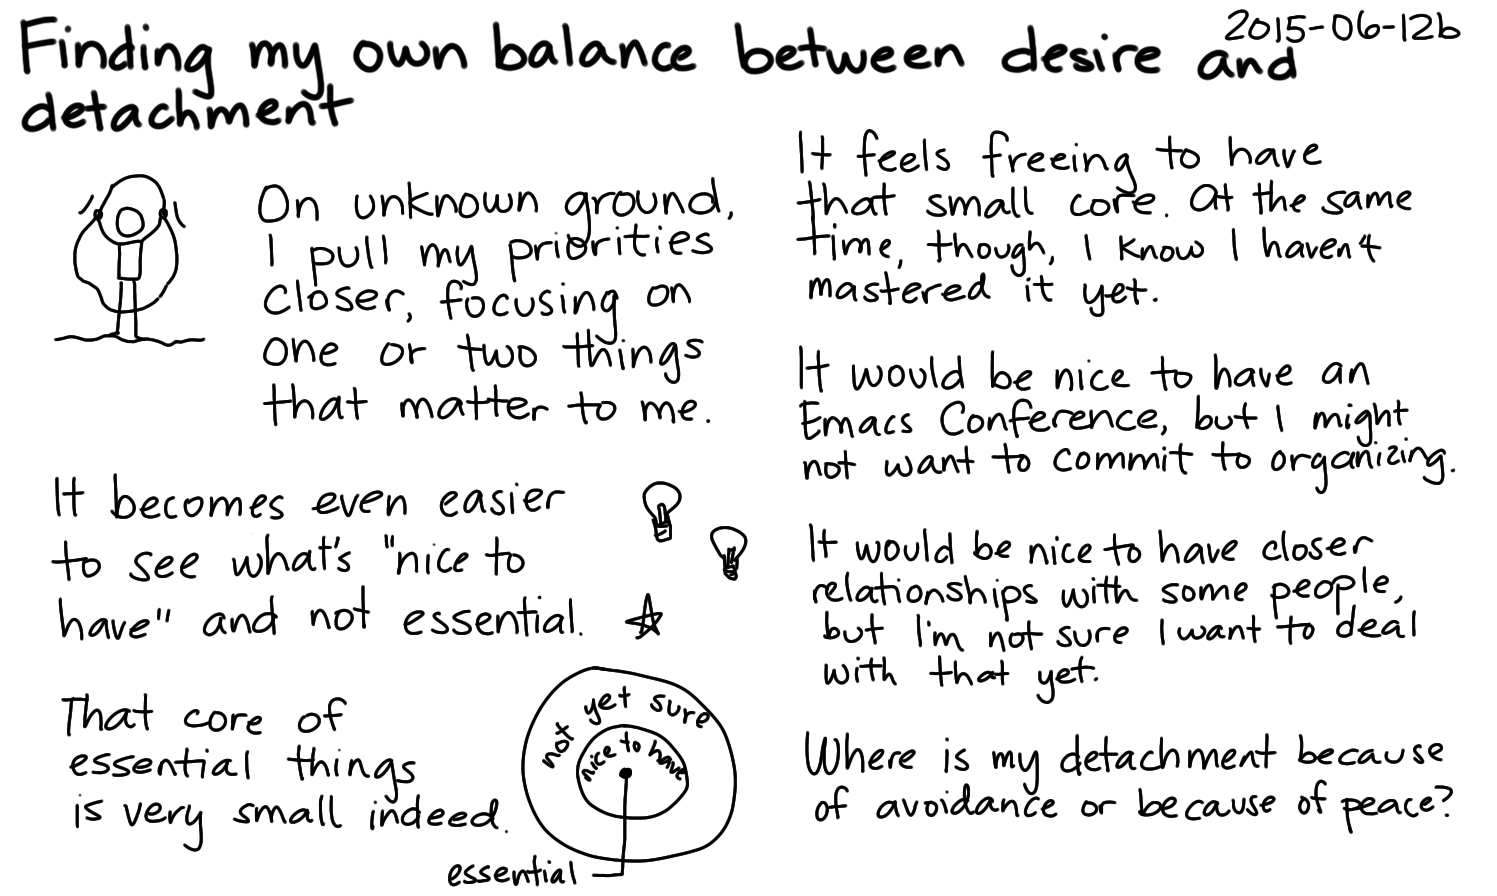 2015-06-12b Finding my own balance between desire and detachment -- index card #stoicism #philosophy #detachment #desire.png